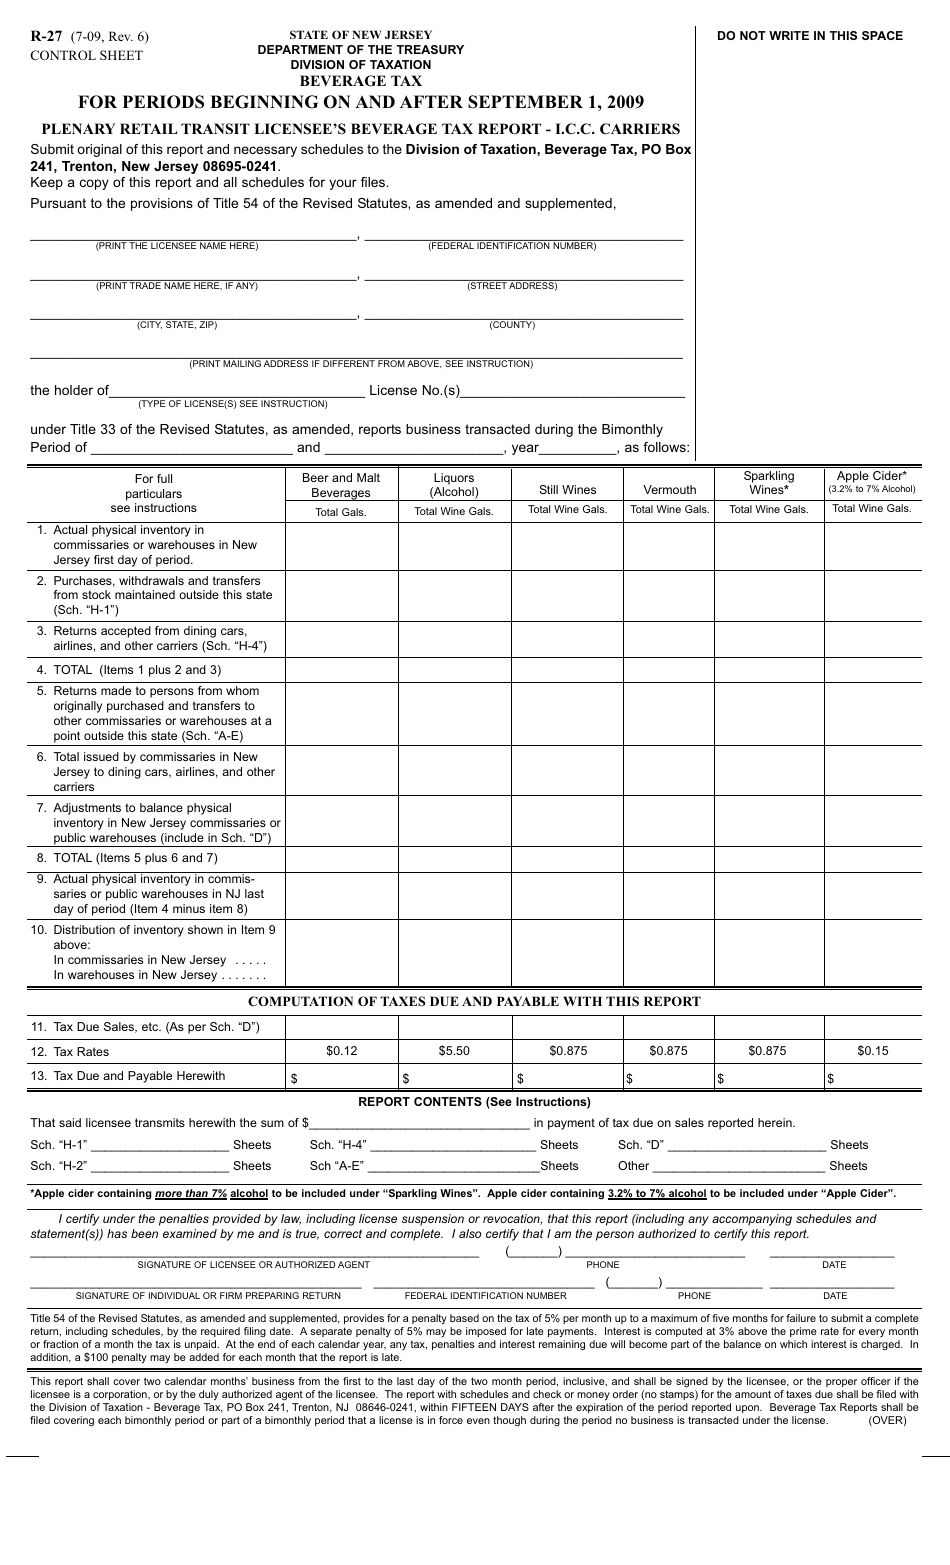 Form R-27 Plenary Retail Transit Licensees Beverage Tax Report - September and After Only - New Jersey, Page 1